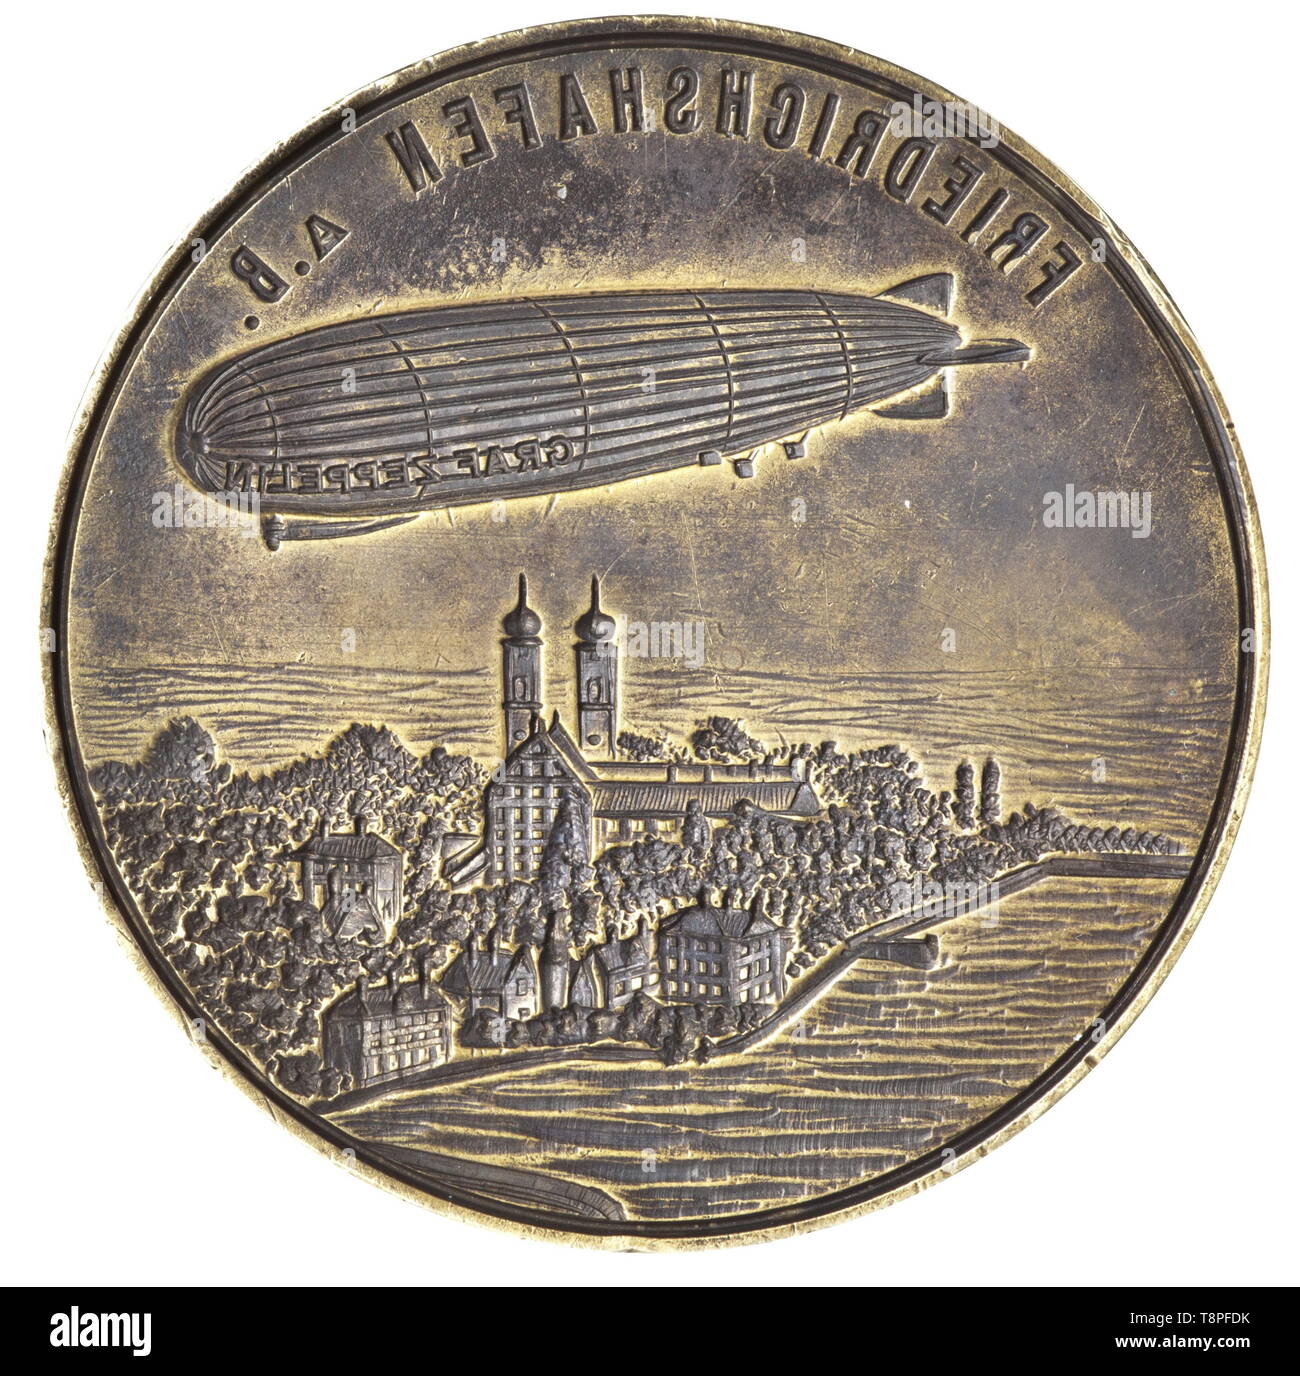 A ship's seal of the 'Graf Zeppelin' airship A large brass seal with the air ship LZ 127 'Graf Zeppelin' above the city of Friedrichshafen on the Bodensee cut into the surface of the seal. The inscription, 'BORDSIEGEL D-LZ 127 'GRAF ZEPPELIN' WELT-FAHRT 1929' ('SHIP'S SEAL D-LZ 127 'GRAF ZEPPELIN' ROUND THE WORLD VOYAGE 1929') is engraved on the stepped rim. Finely turned hardwood grip. Height 11.5 cm. The 'Graf Zeppelin' was 236.6 m long with a diameter of 30.5 m and a buoyant gas volume of 105,000 cubic meters. It was built in Friedrichshafen b, Additional-Rights-Clearance-Info-Not-Available Stock Photo